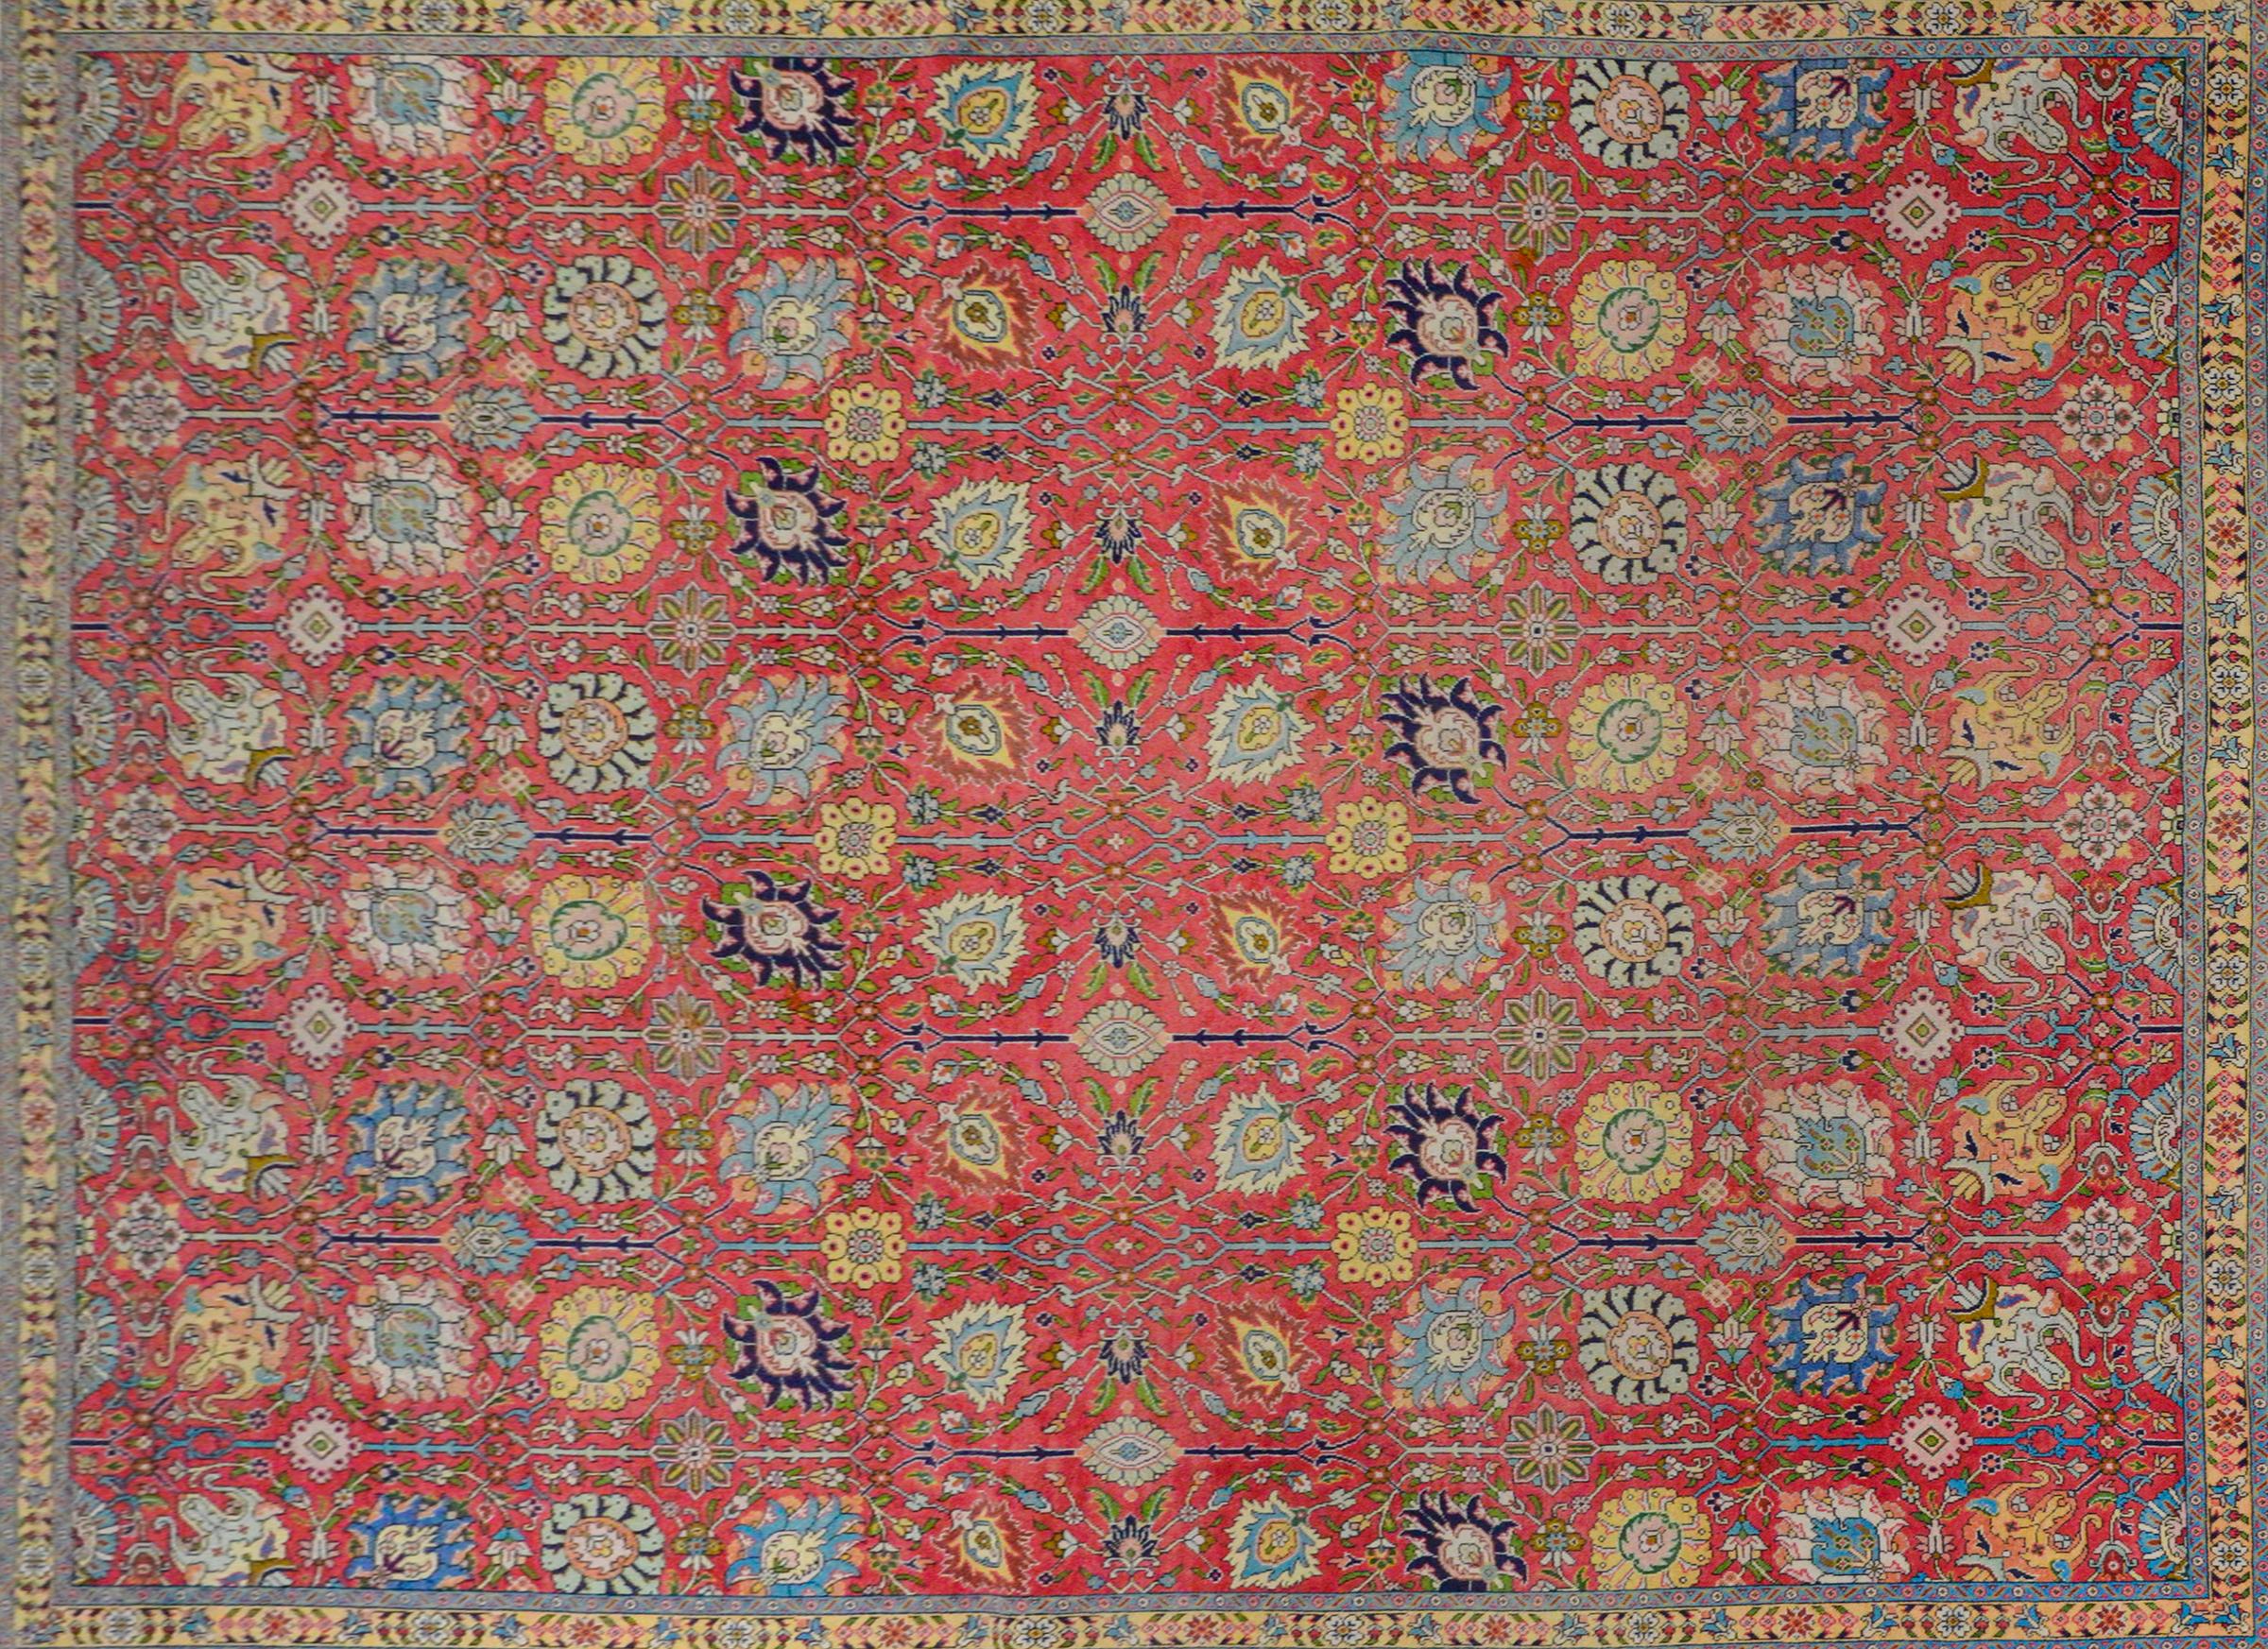 An incredible mid-20th century Persian Tabriz with an outstanding trellis floral and scrolling vine pattern woven in brilliant turquoise, lime greens, bright yellows, all on a bright pink background. The border is also outstanding with a large